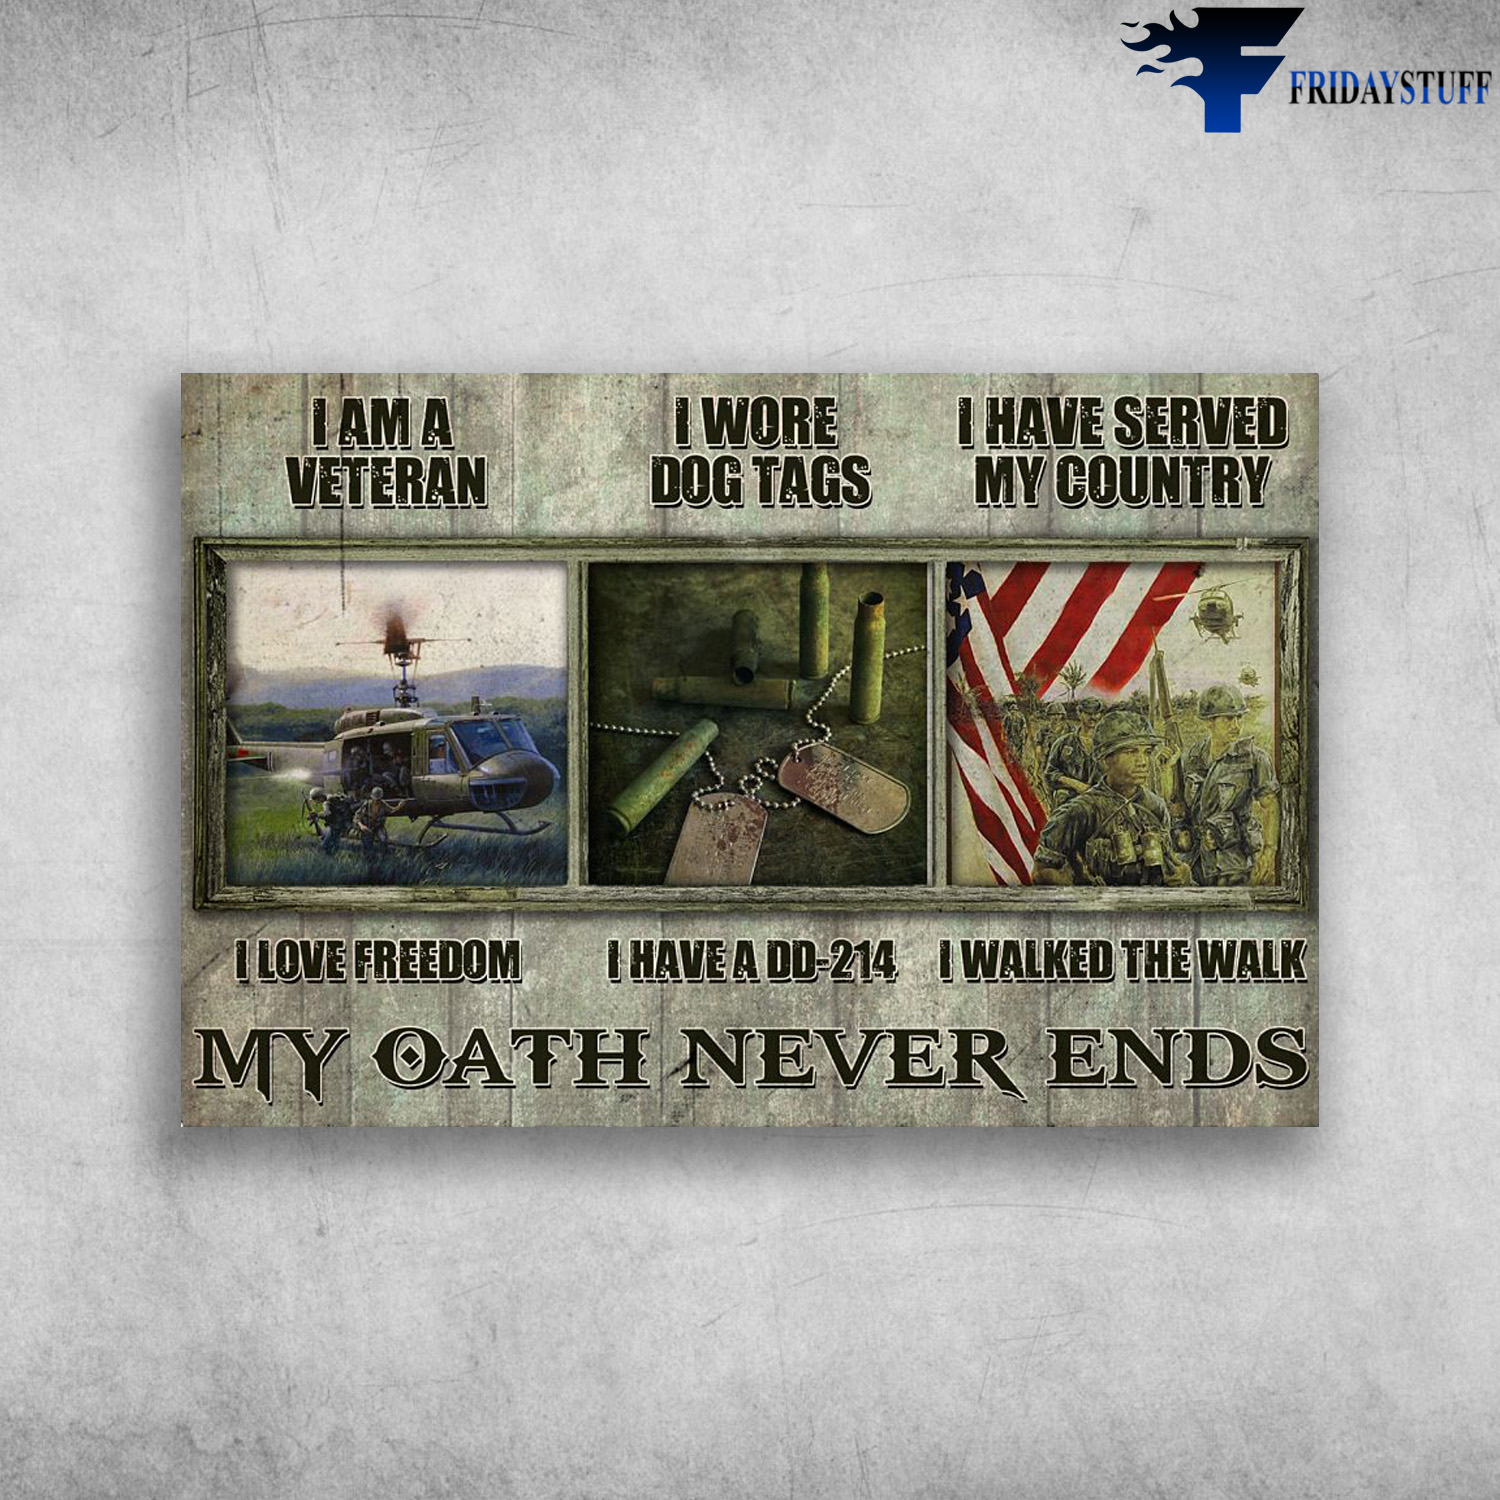 My Oath Never Ends - I Am Veteran, I Love Freedom, I Wore Dog Tags, I Have A DD-214, I Have Served My Country, I Walked The Walk